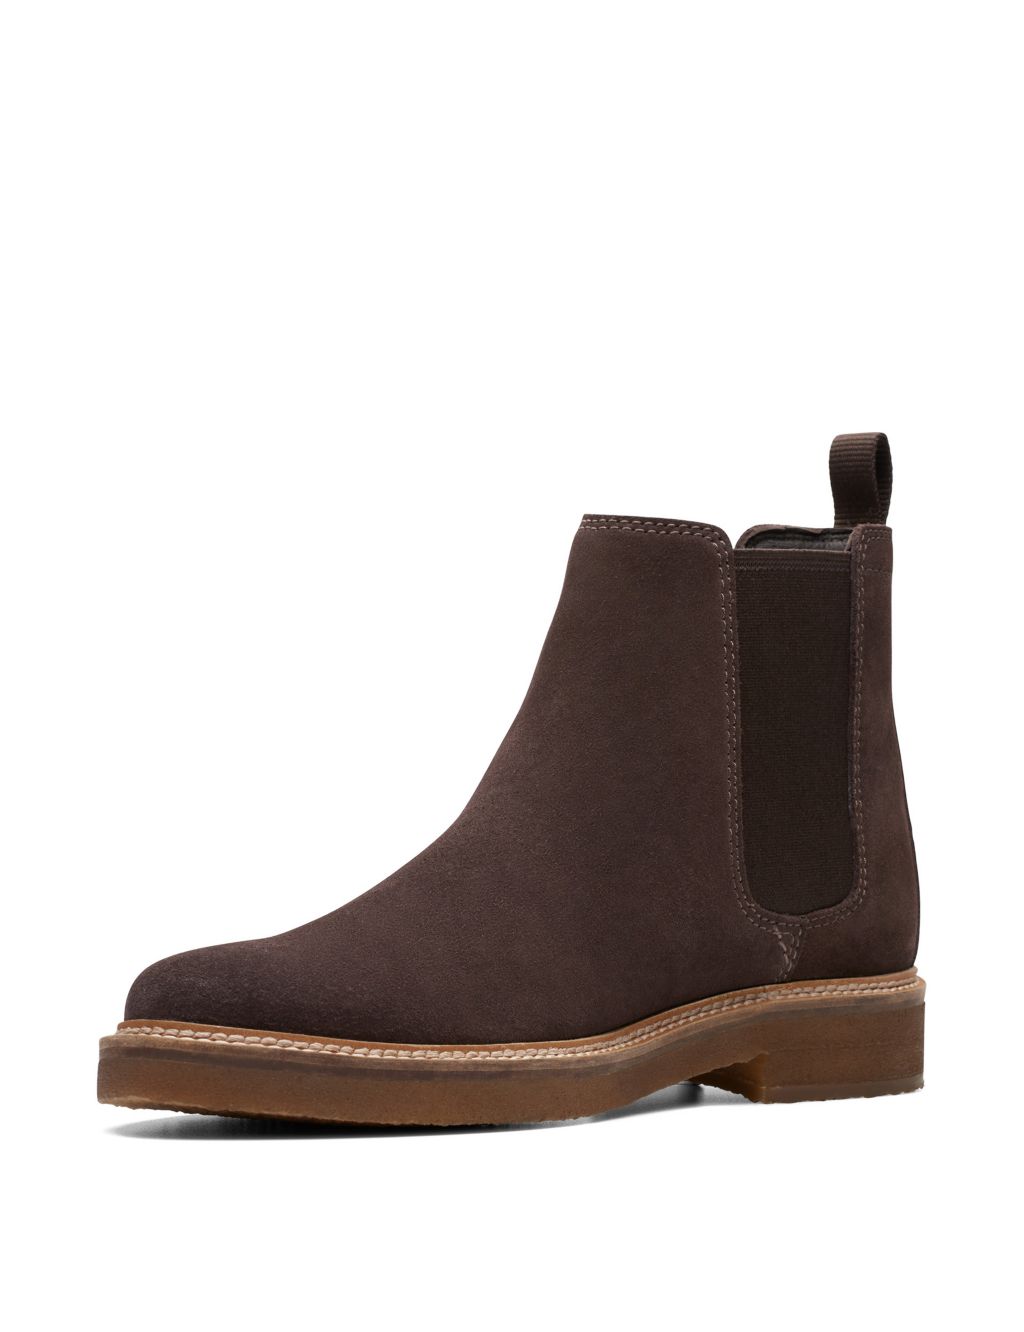 Suede Chelsea Boots image 4